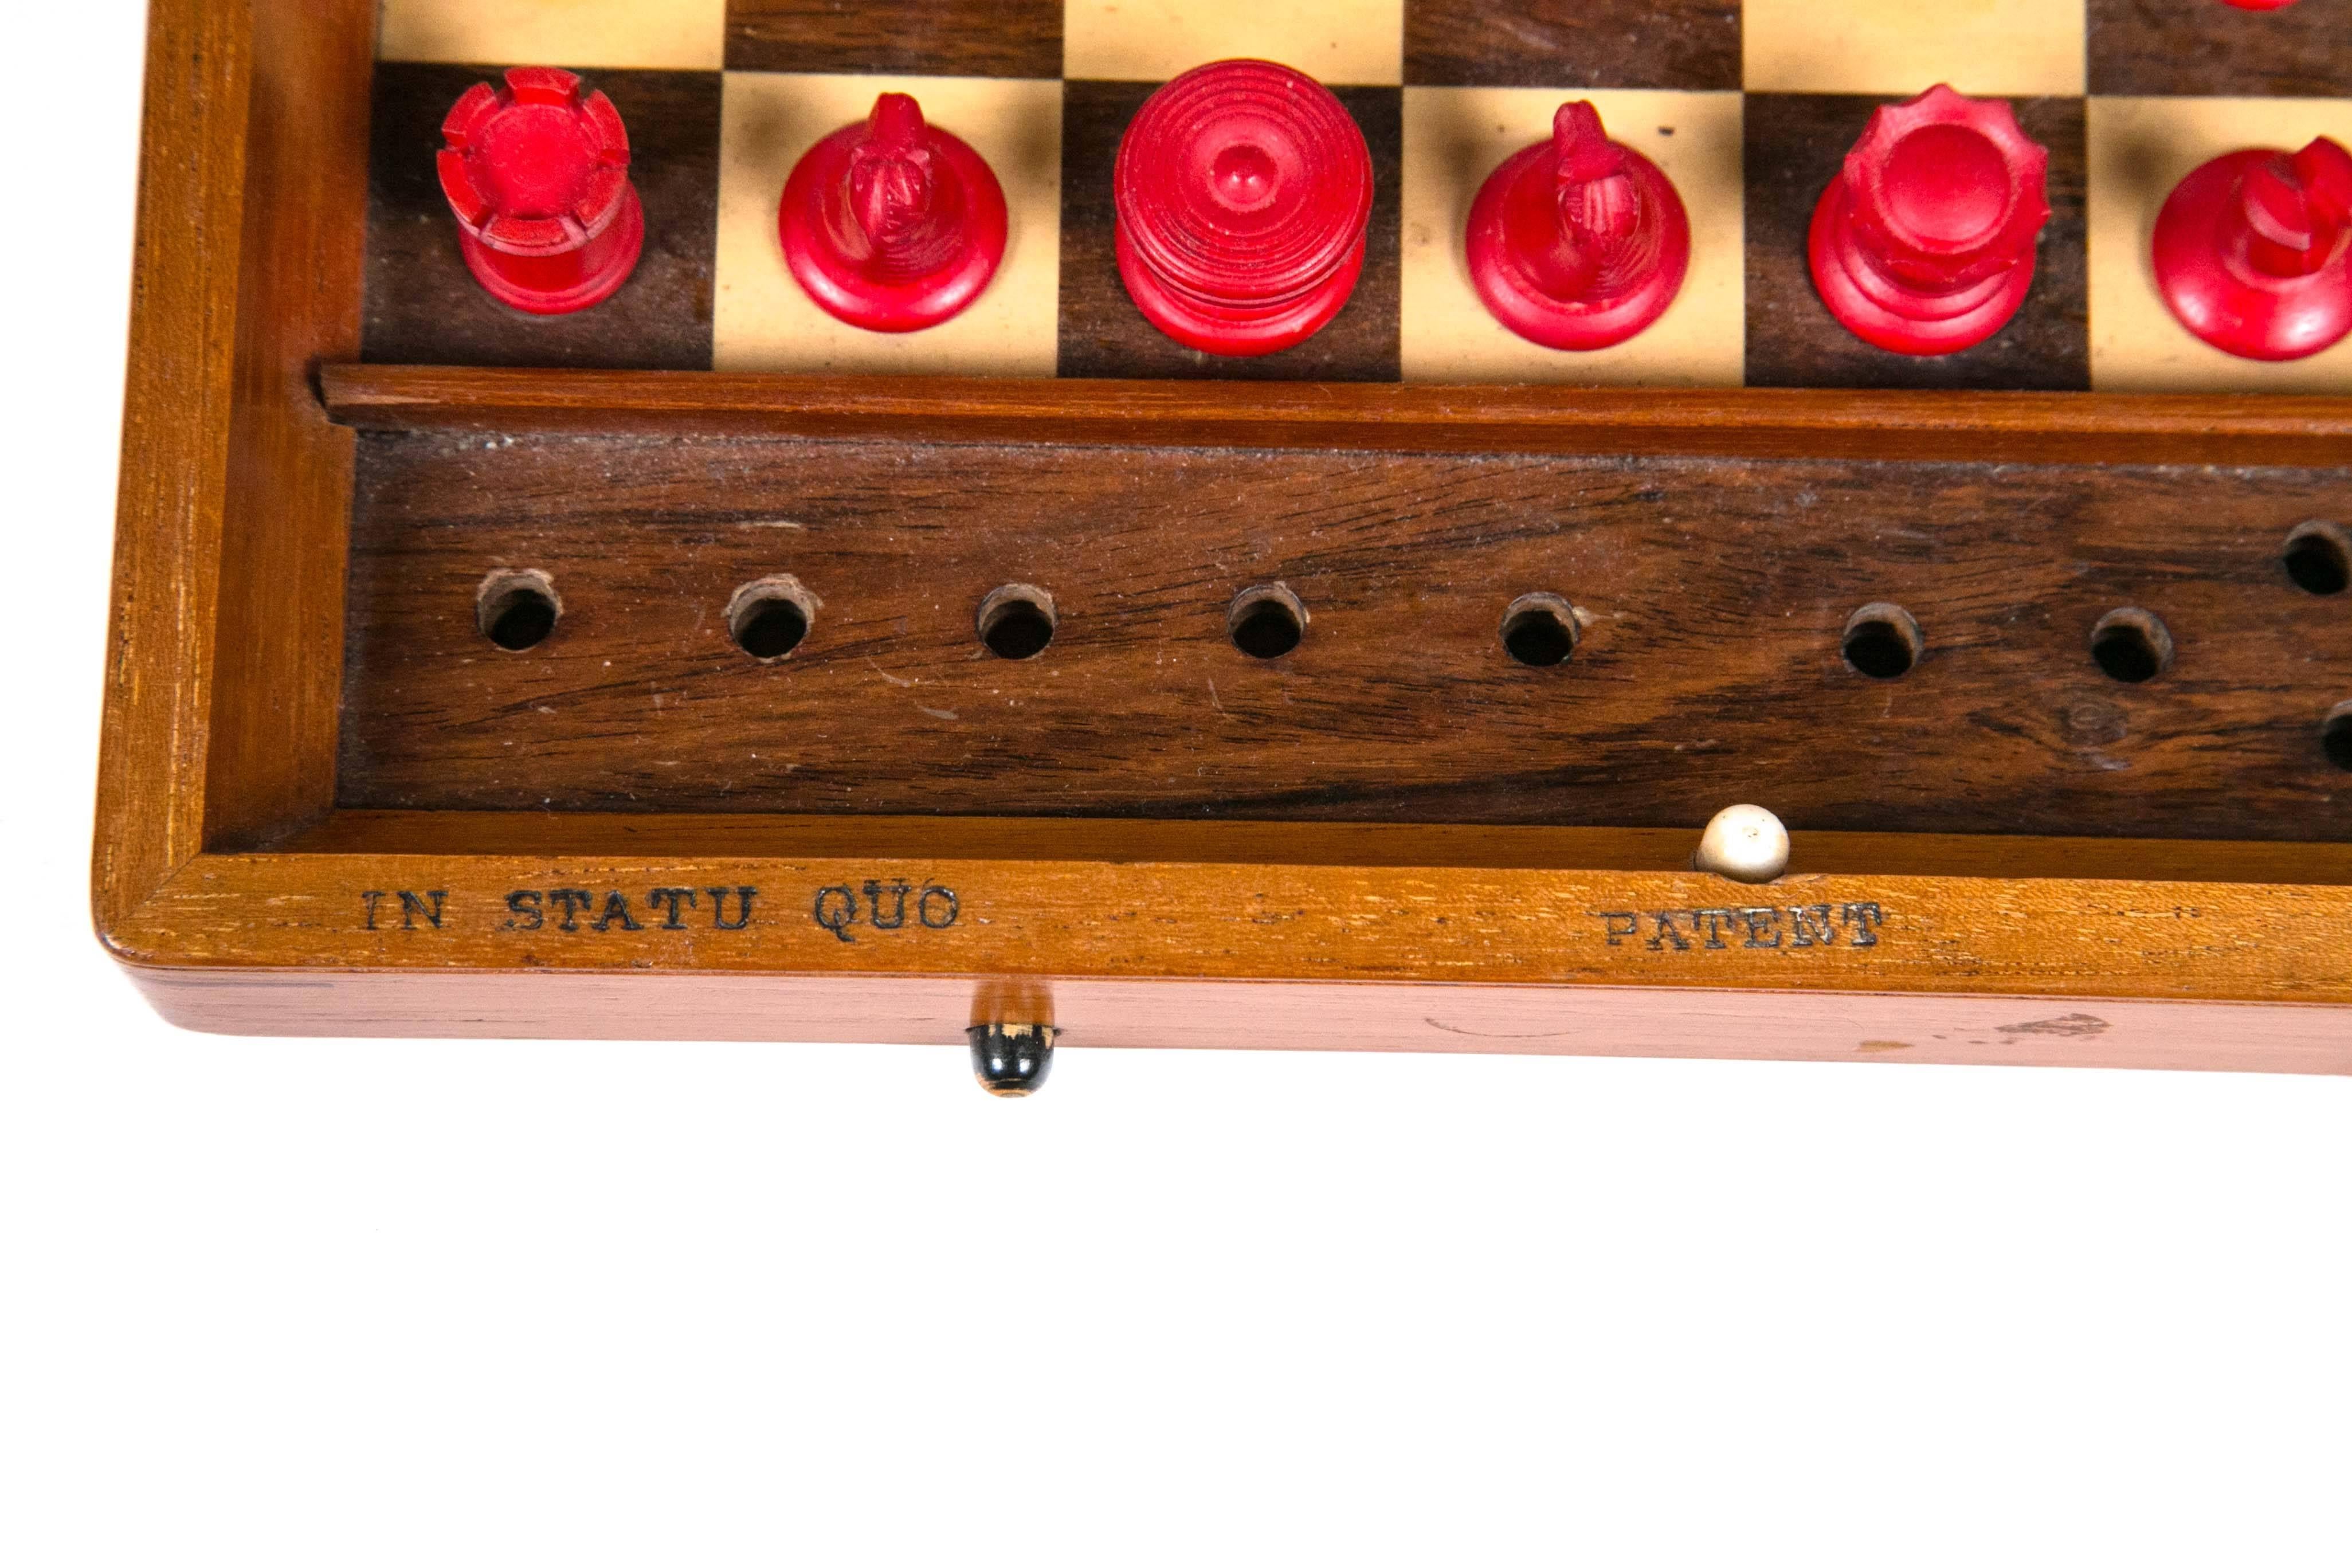 English 1870 mahogany chess game signed Jaques/London.
One of several antiques we have acquired from a private collector.
Closes into a terrific looking travel box, the chest set has pieces that lock into place so when you carry and travel, they